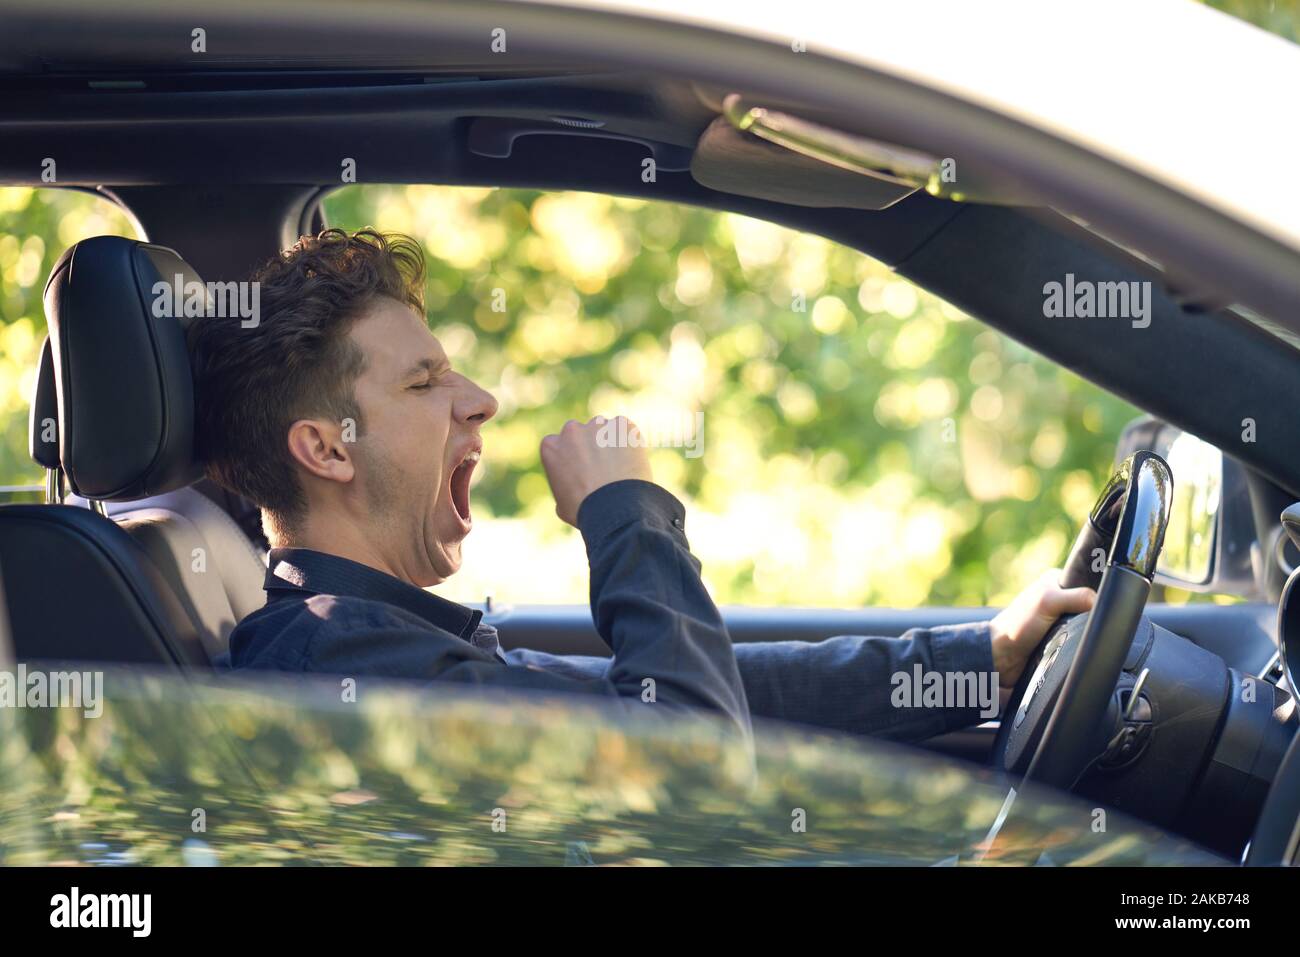 Sideview of a young driver yawning in his car, greenery in background Stock Photo